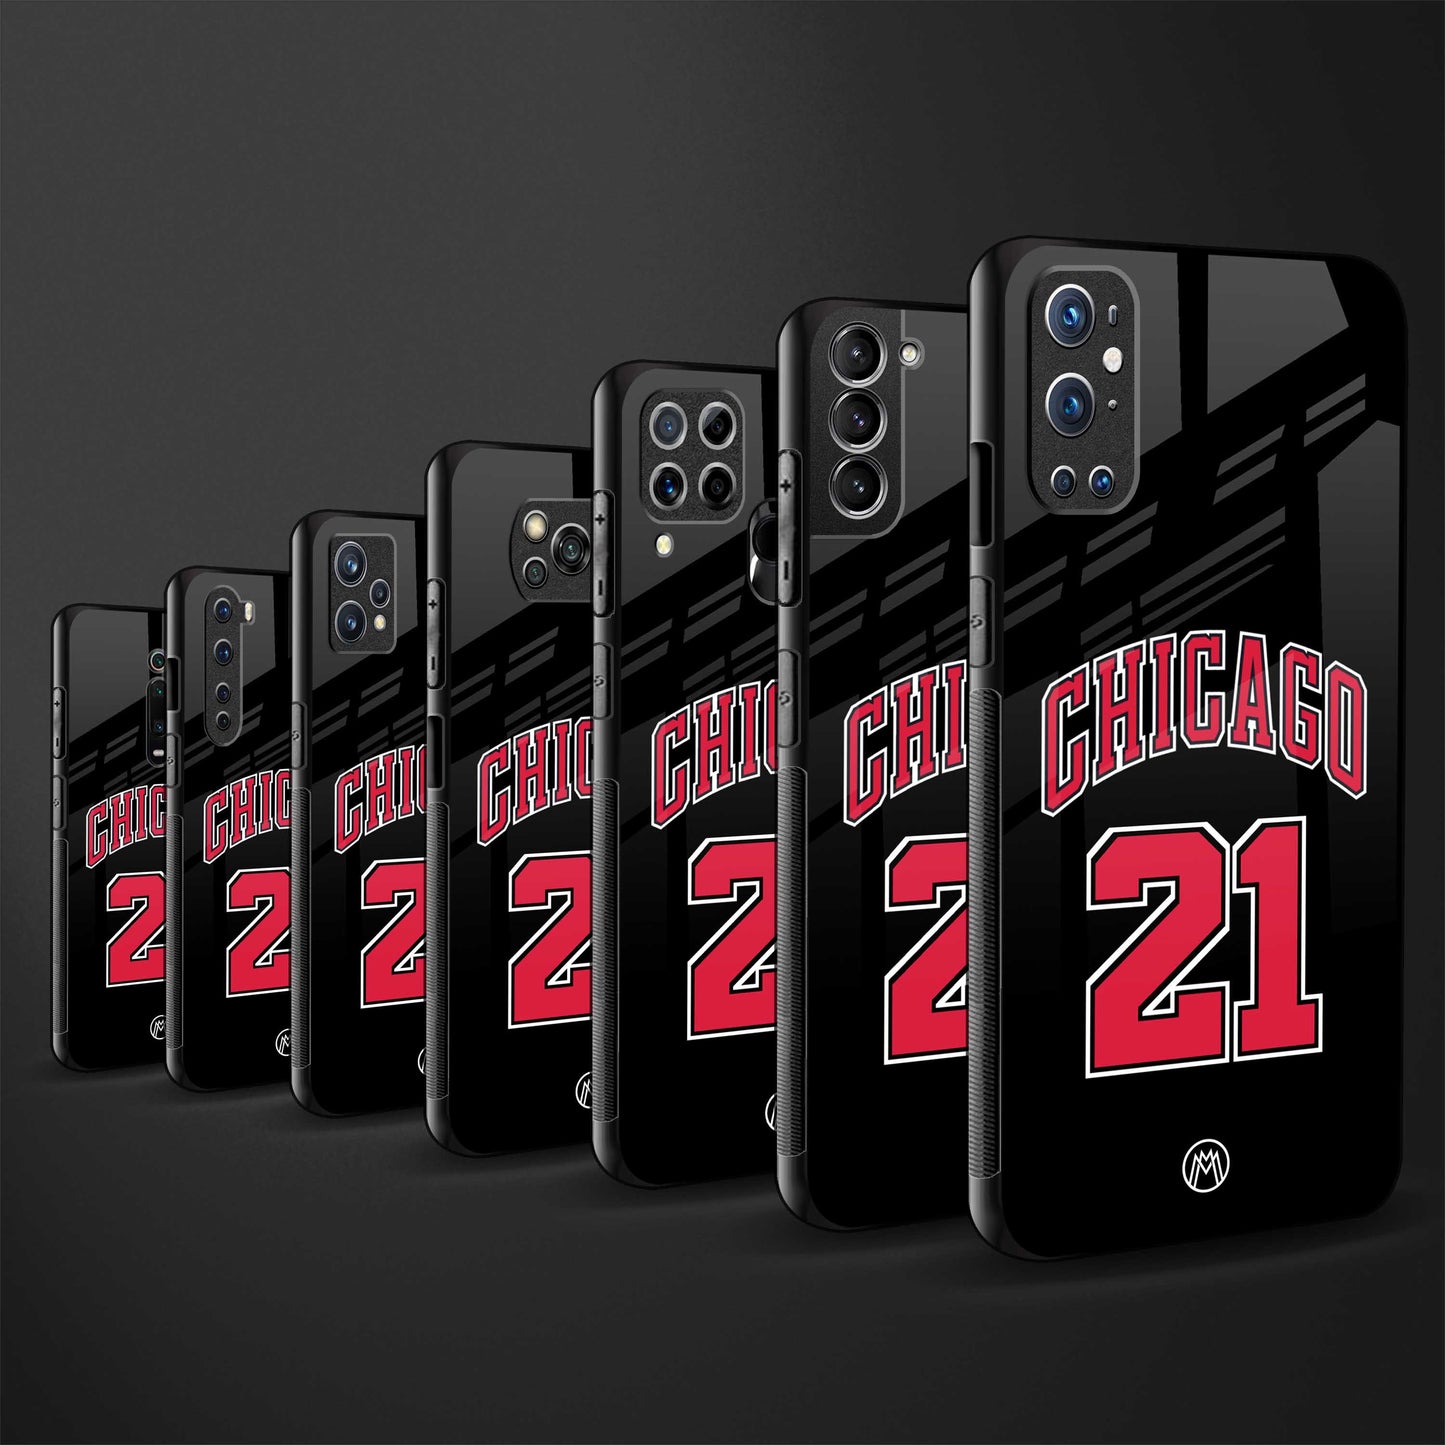 chicago 21 back phone cover | glass case for samsung galaxy a23